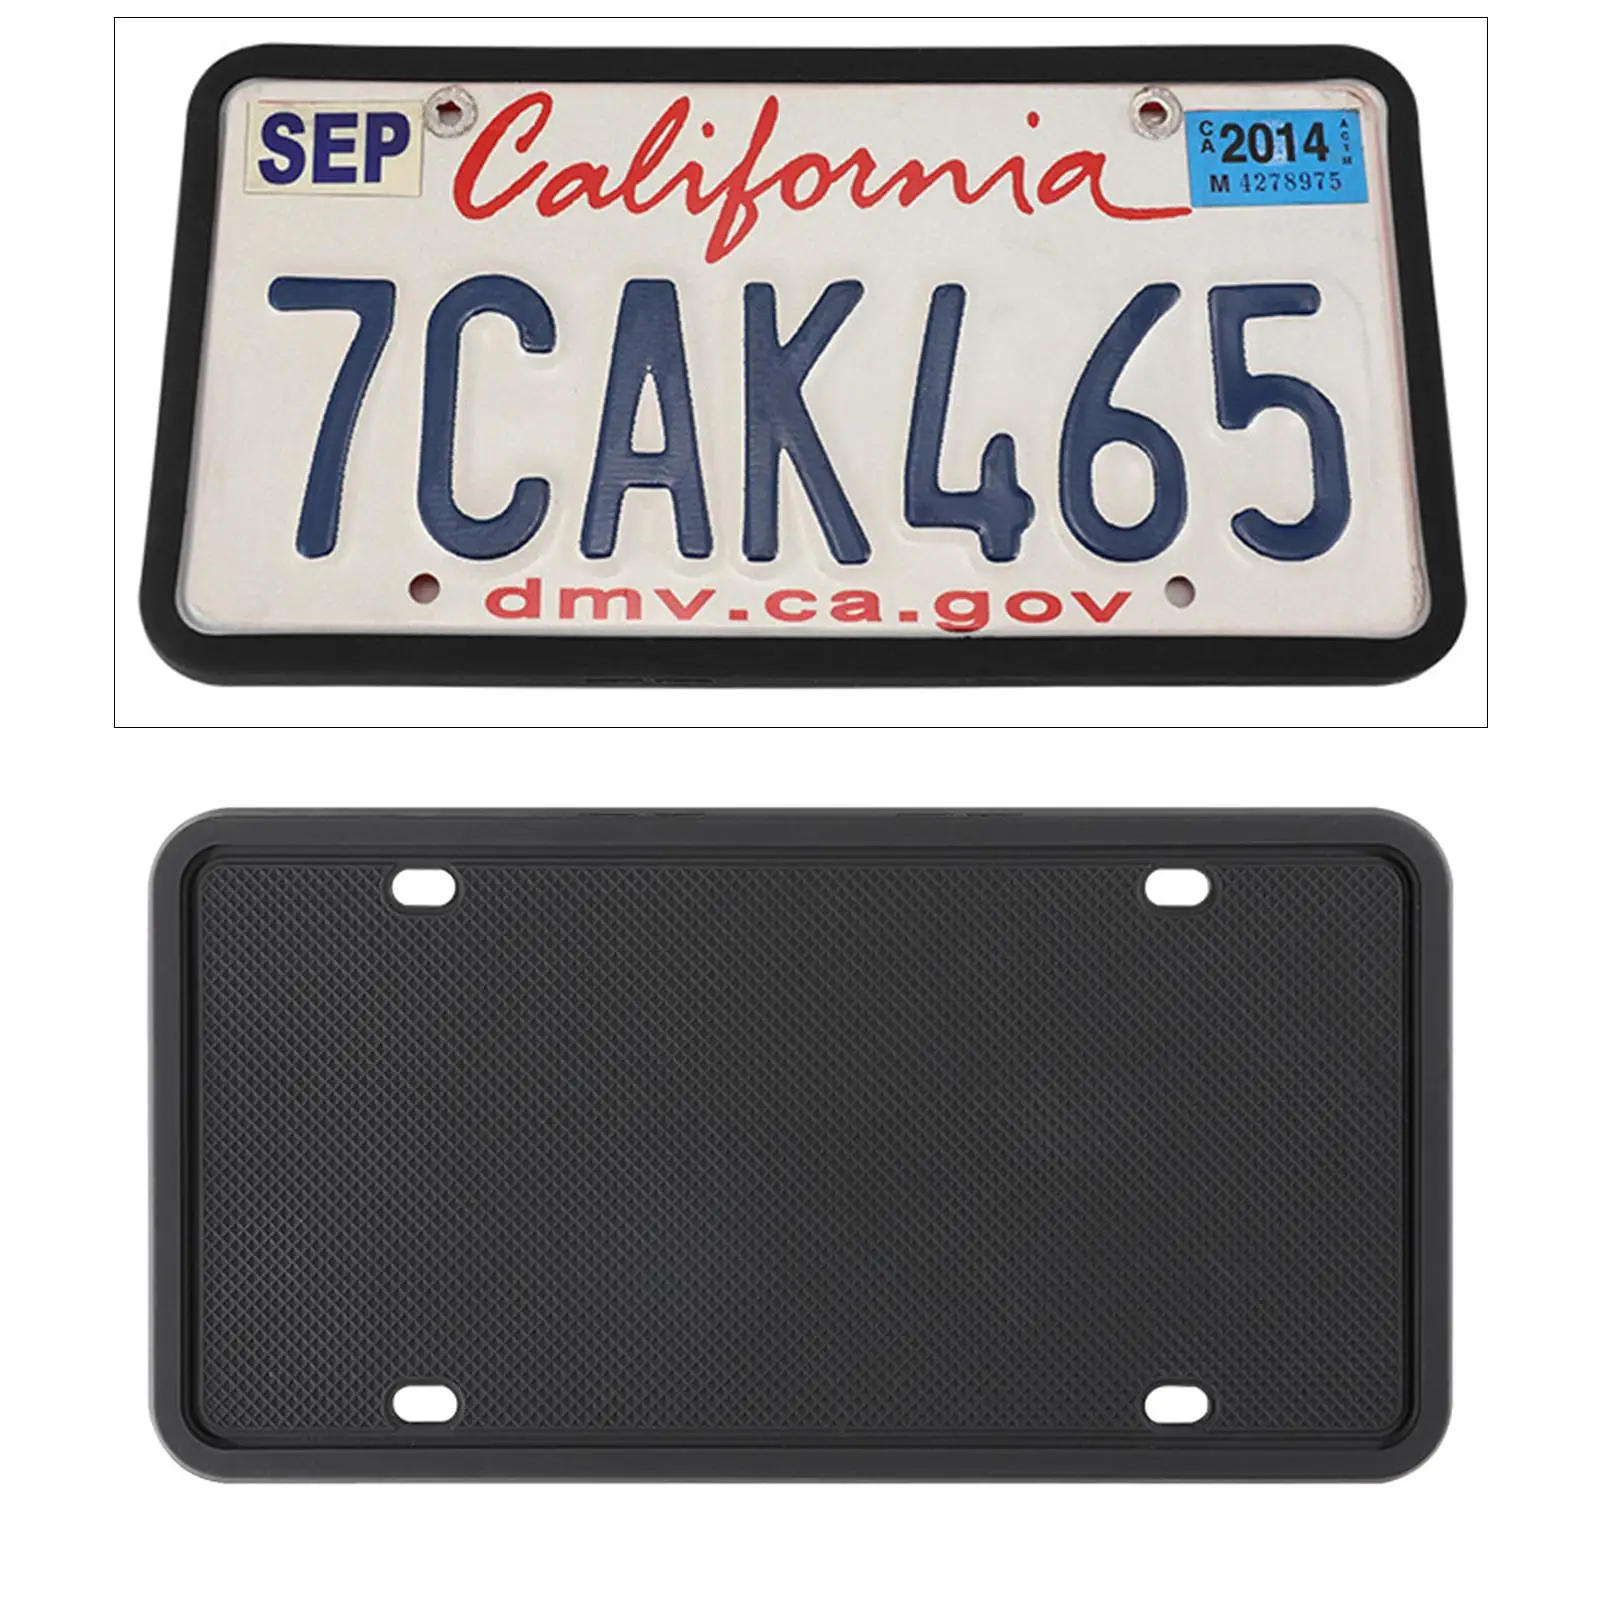 Silicone License Plate Frames, Car License Plate Cover,  License Plate Bracket Holder. Rust-Proof, Rattle-Proof, Weather-Proof